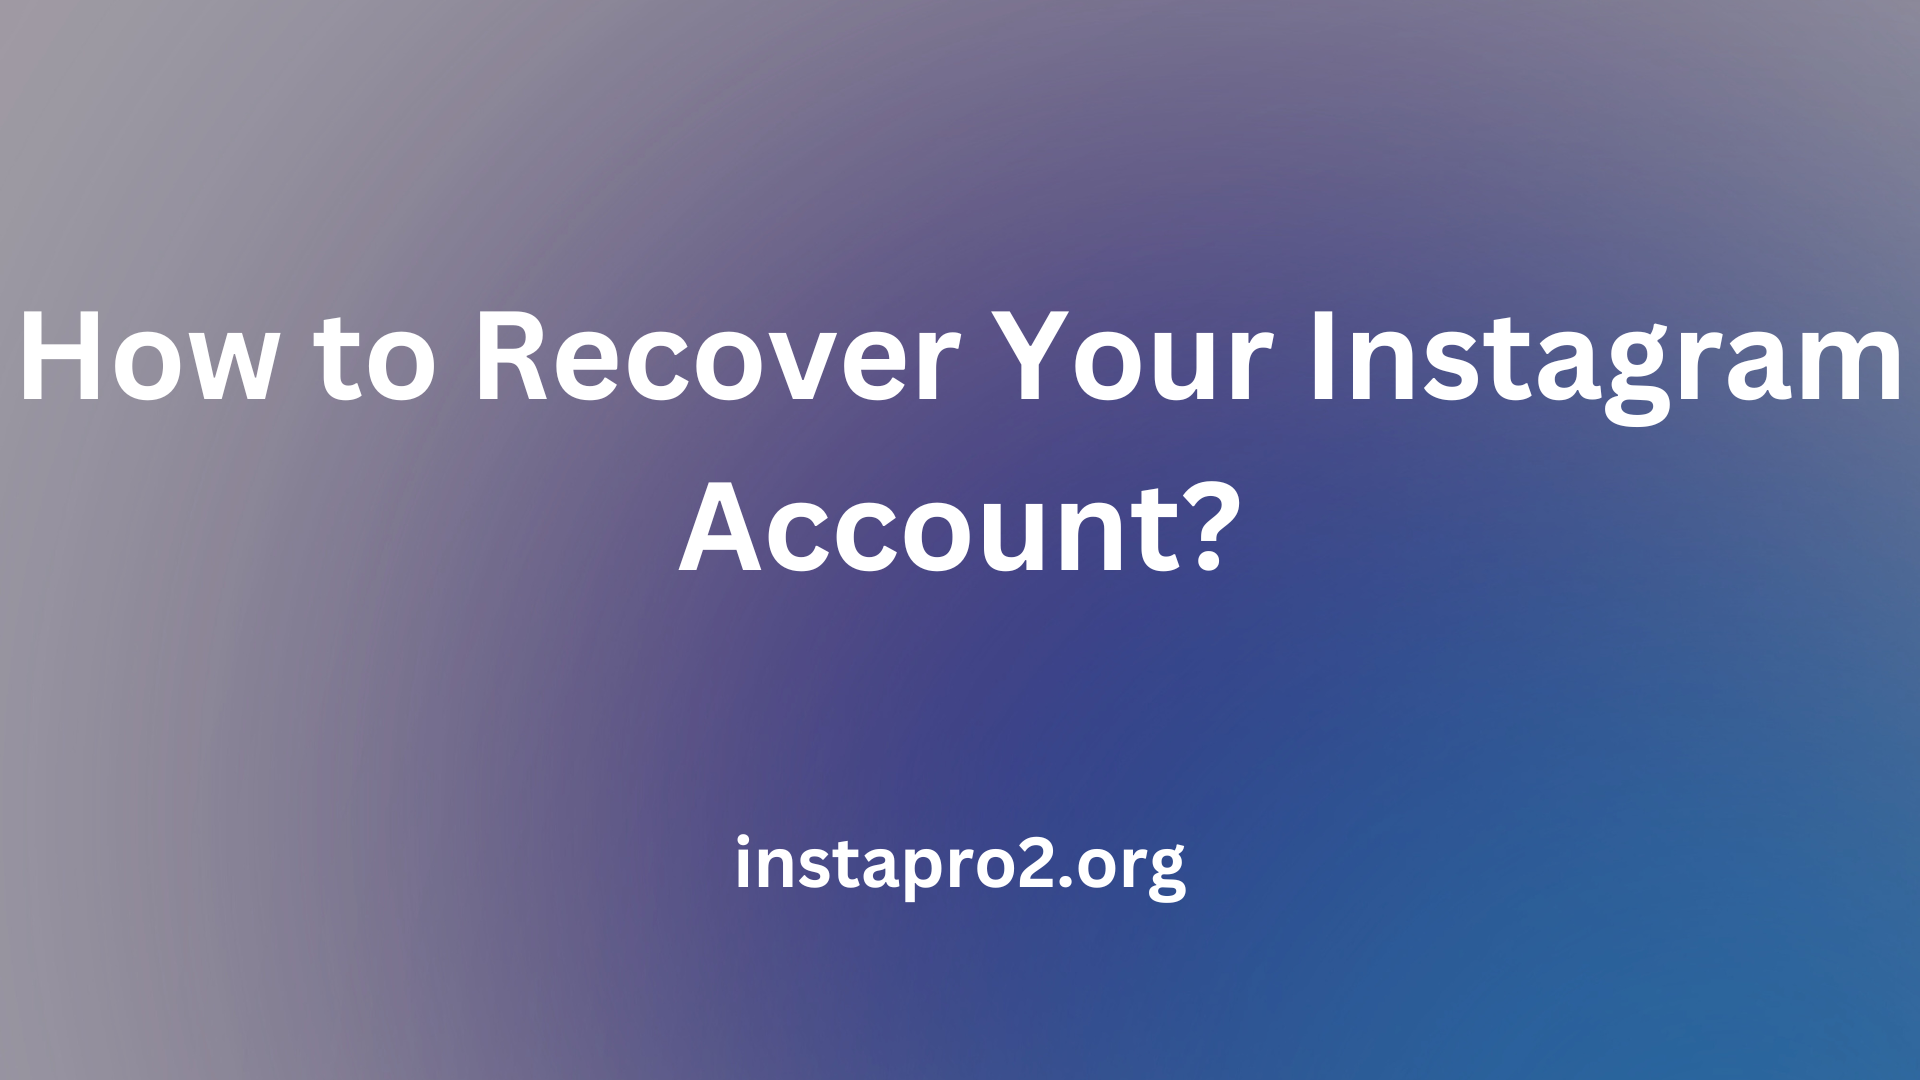 How to Recover Your Instagram Account?